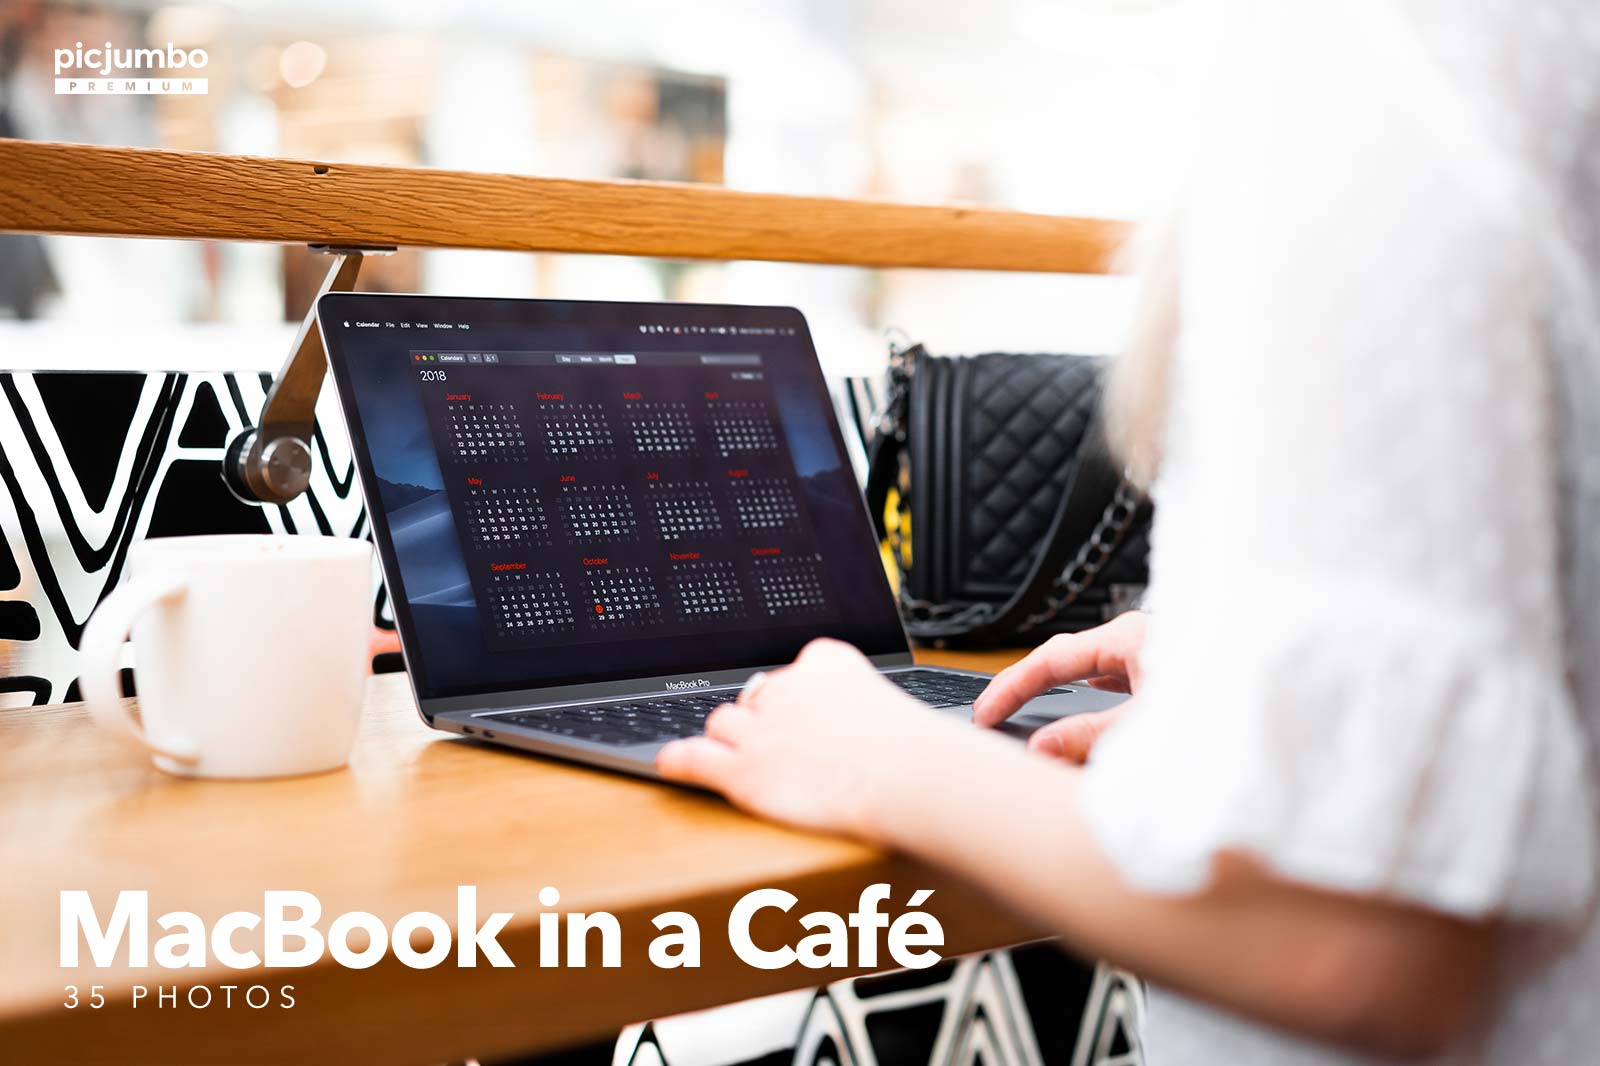 Download hi-res stock photos from our MacBook in a Café PREMIUM Collection!